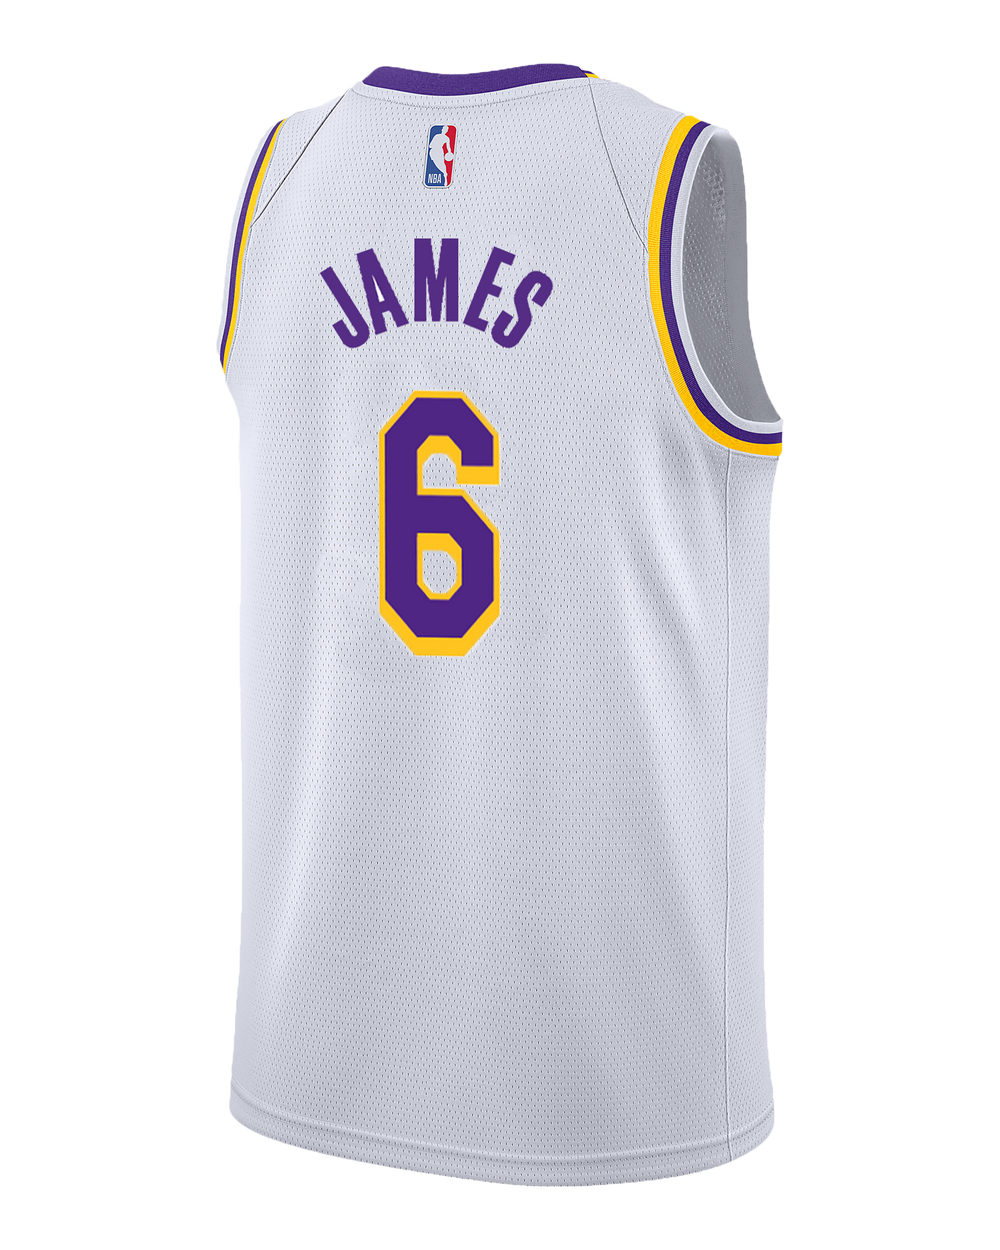 Official Los Angeles Lakers Jerseys, Lakers Jersey, Lakers Basketball  Jerseys